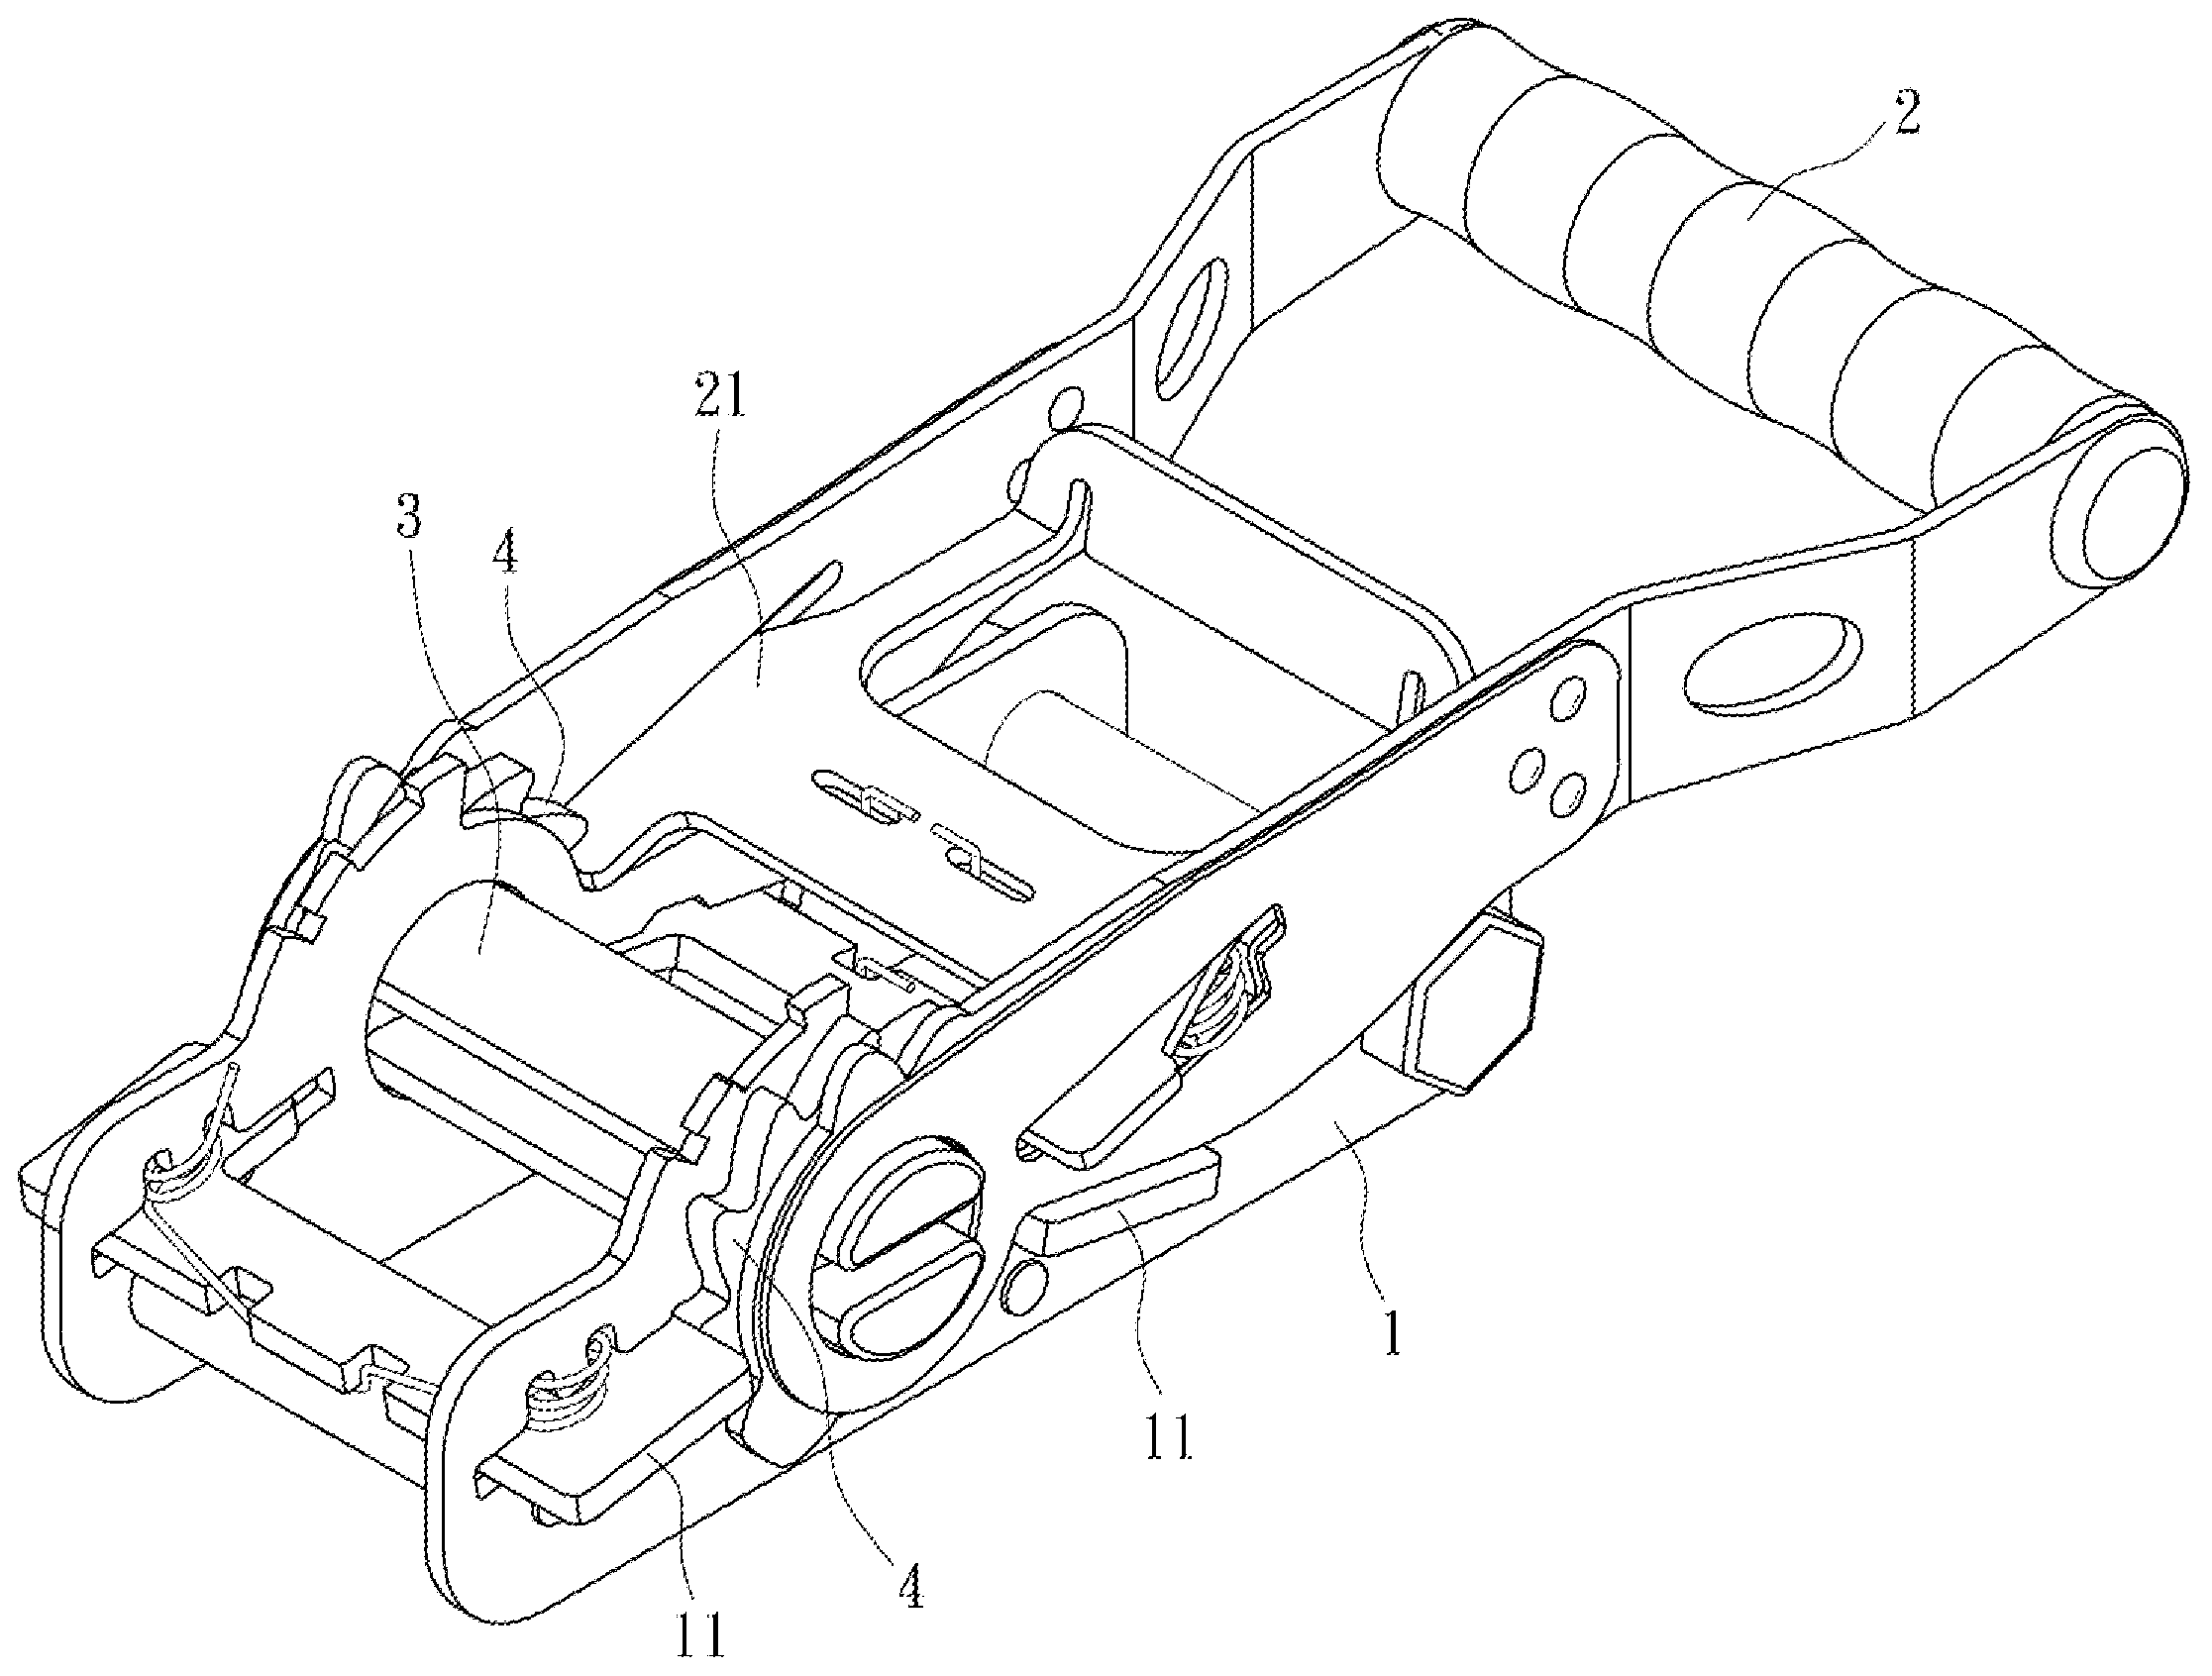 Hand puller with a structure of double stopping plates